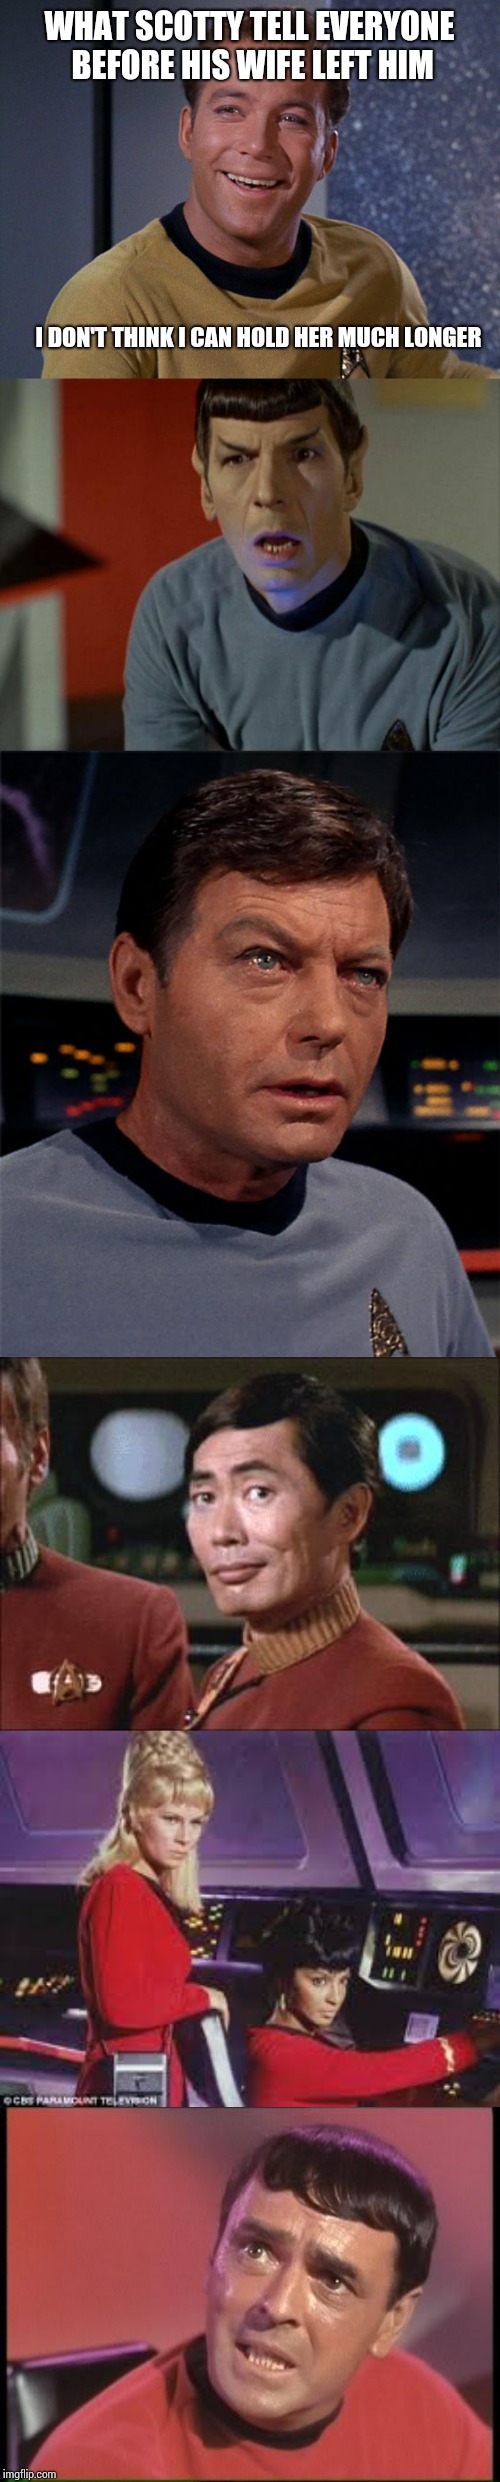 WHAT SCOTTY TELL EVERYONE BEFORE HIS WIFE LEFT HIM; I DON'T THINK I CAN HOLD HER MUCH LONGER | image tagged in sulu oh my,shocked spock,scotty,bones mccoy,kirk,star trek jealous babes | made w/ Imgflip meme maker